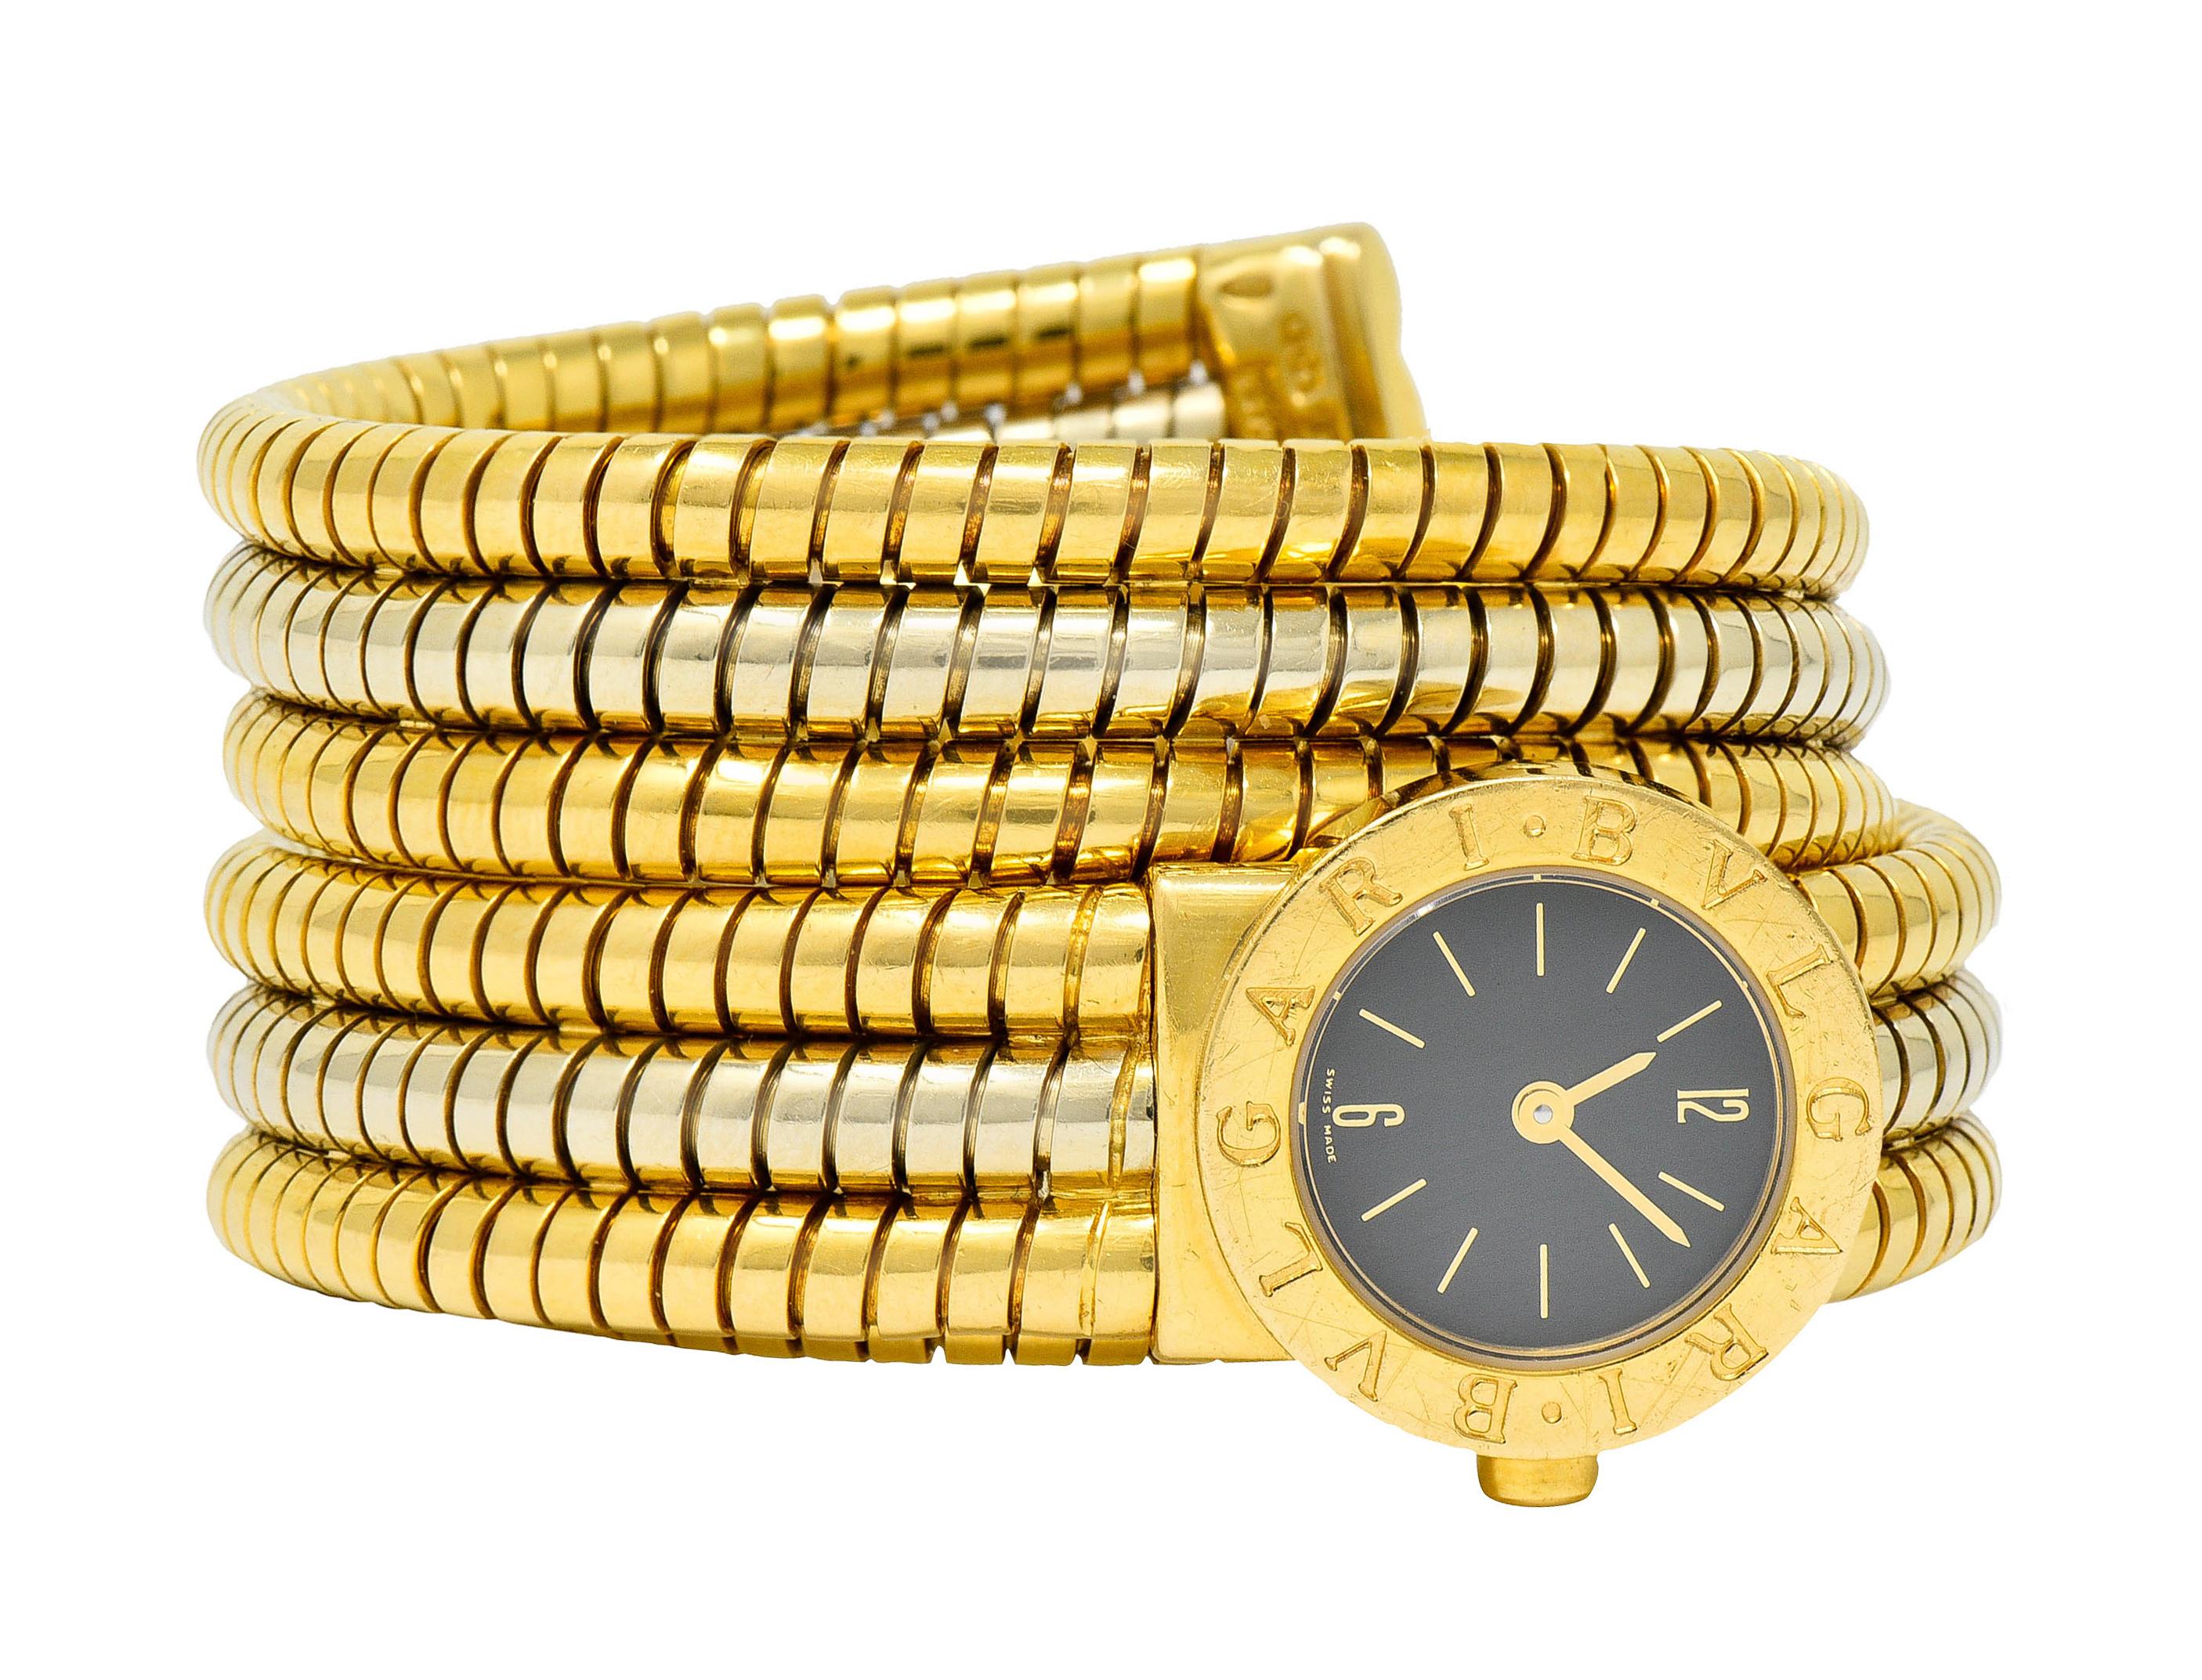 Watch is designed with a coiled tubogas watchband that adjusts to fit most wrists

Comprised of three segments of deeply ridged white and yellow gold

And features a round watch face with gold numerals and dial

Covered by sapphire crystal with a